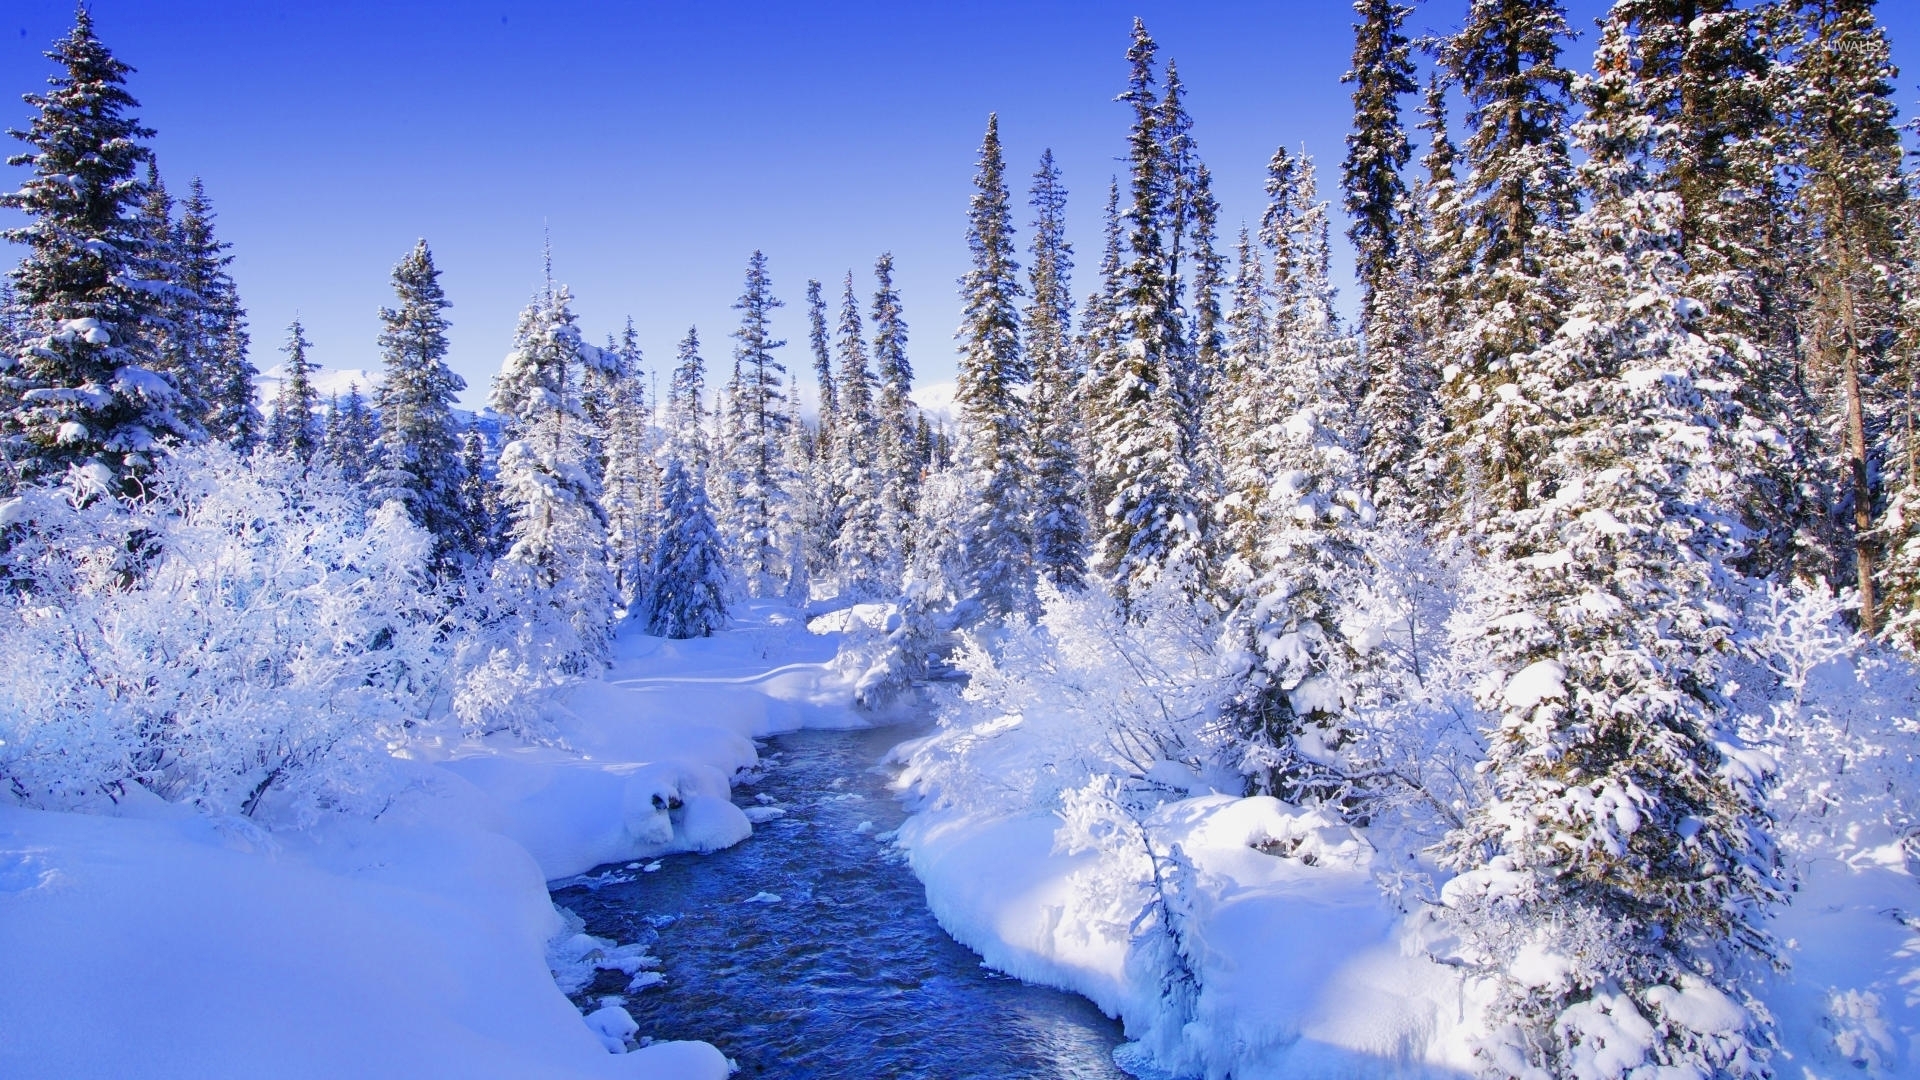 Steamy river by the snowy forest wallpaper   Nature wallpapers 1920x1080